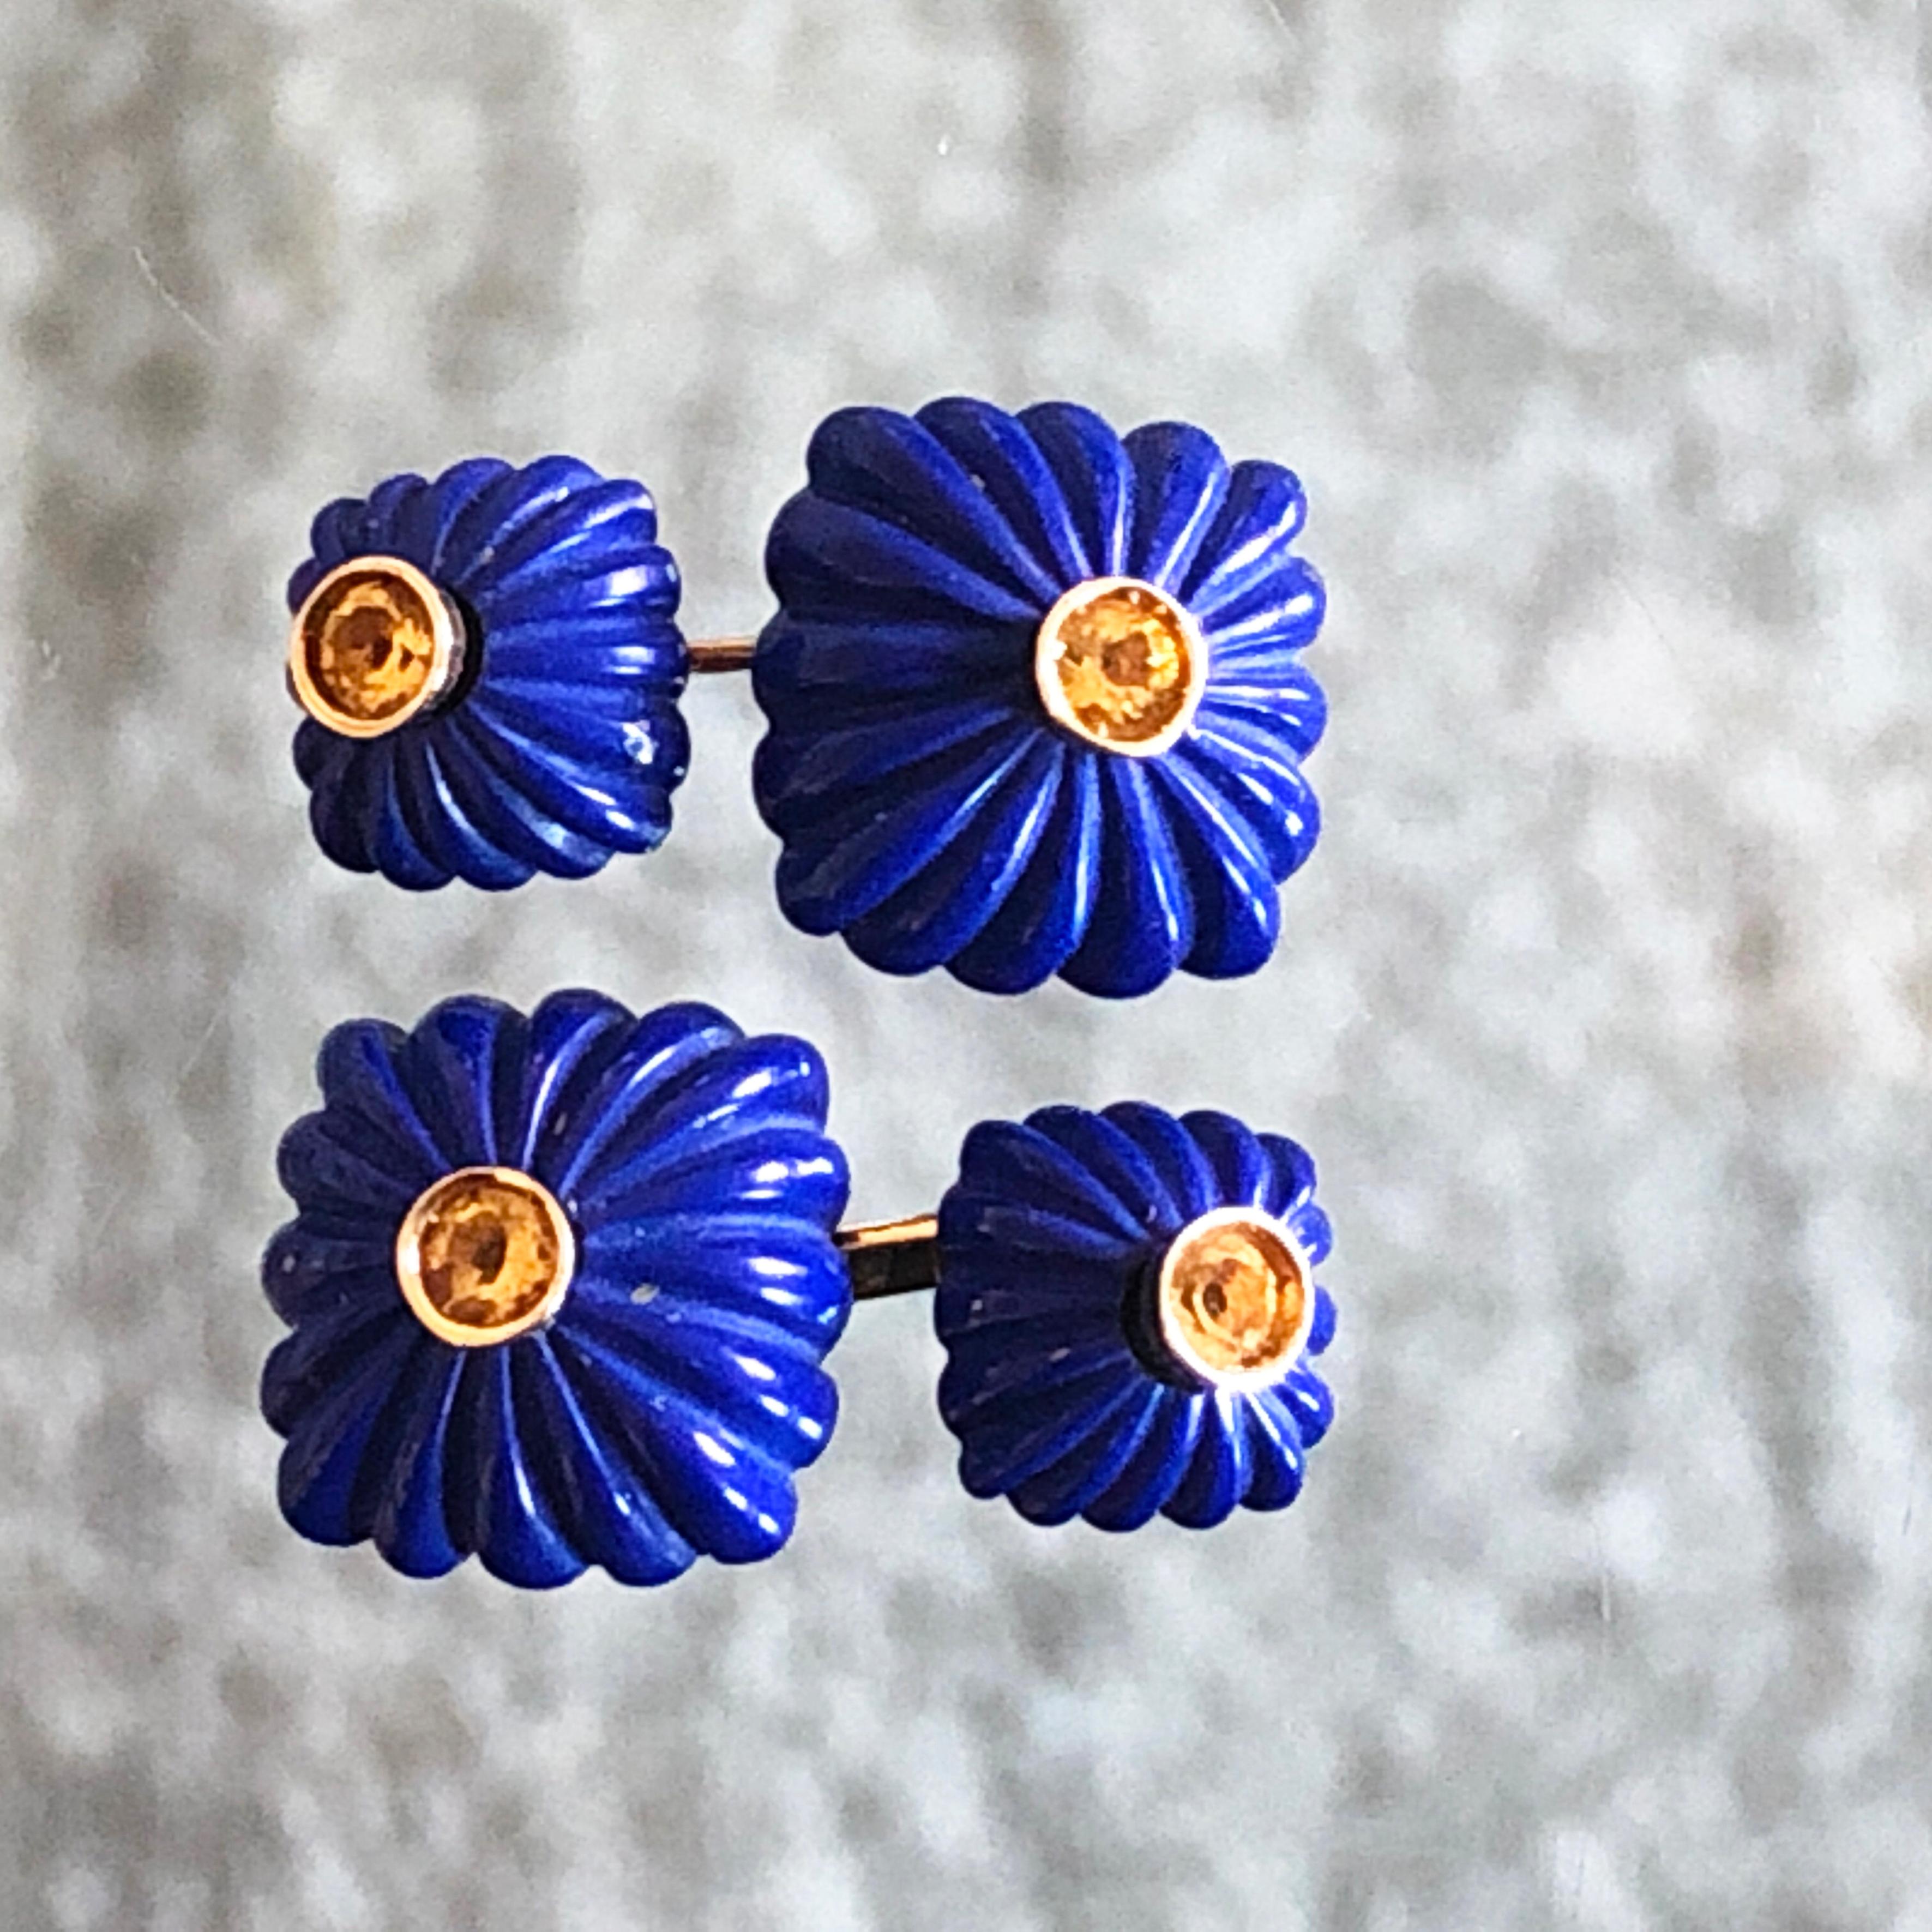 Awesome, One-of-a-kind, Squared Shaped Hand Inlaid Hand Carved Natural Afghan Deep Blue Lapis Lazuli Cufflinks featuring four natural 0.51 Carat Brilliant Cut Yellow Sapphire in a 9k Yellow Gold setting.
In a smart fitted black Box and Pouch.
We